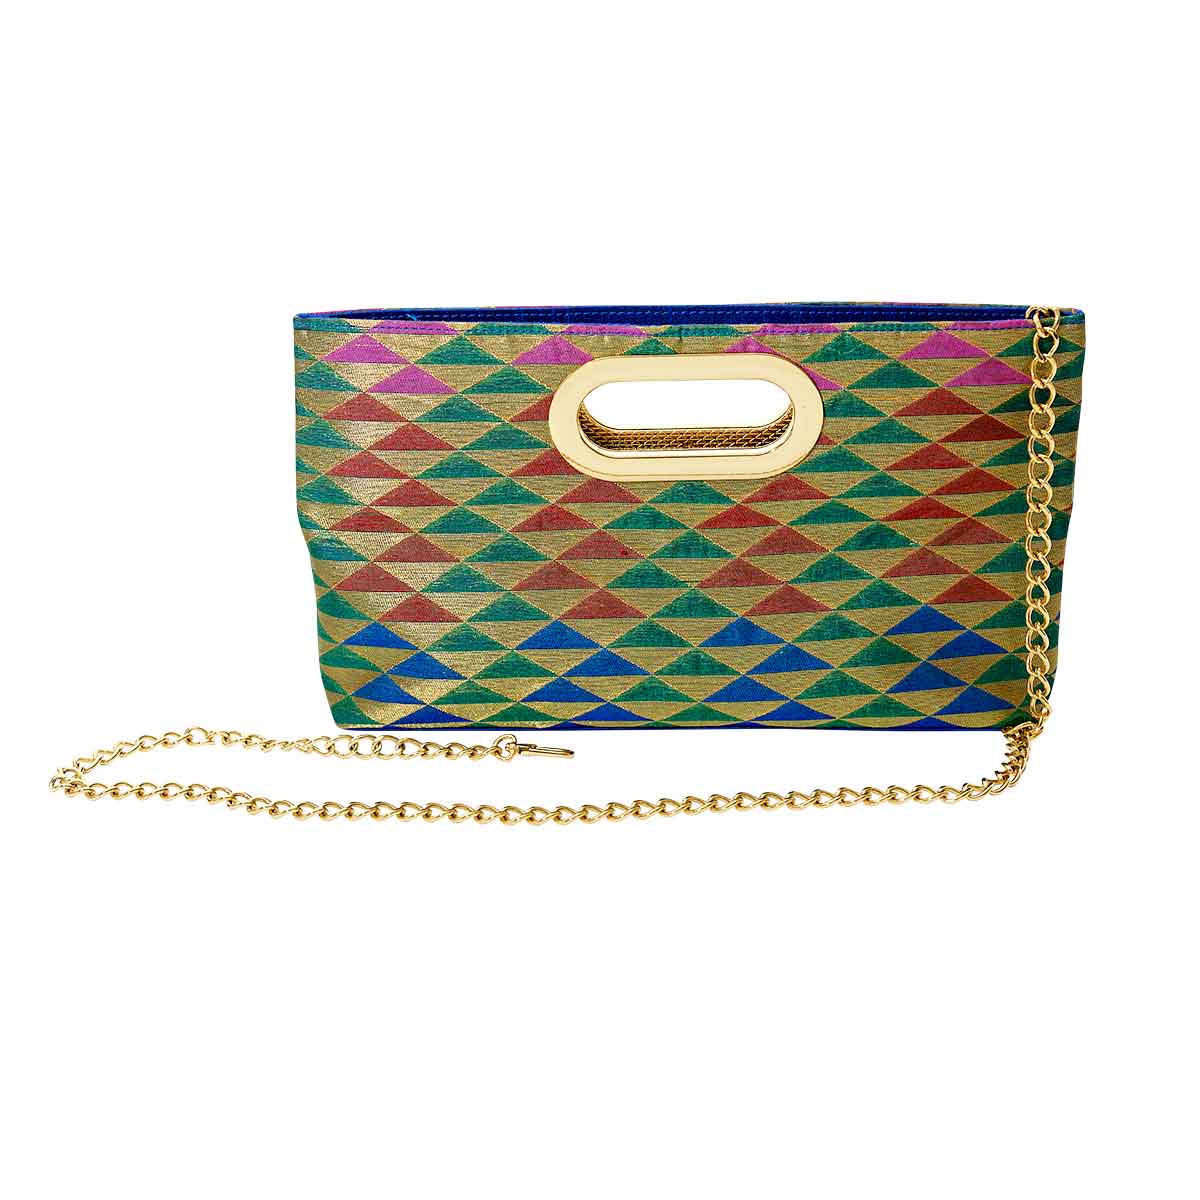 Gaja Multi color mini tote with gold handle and chain shoulder strap. Rani Collection as seen at NYFW 2021 Flying solo by Veronica Tharmalingam